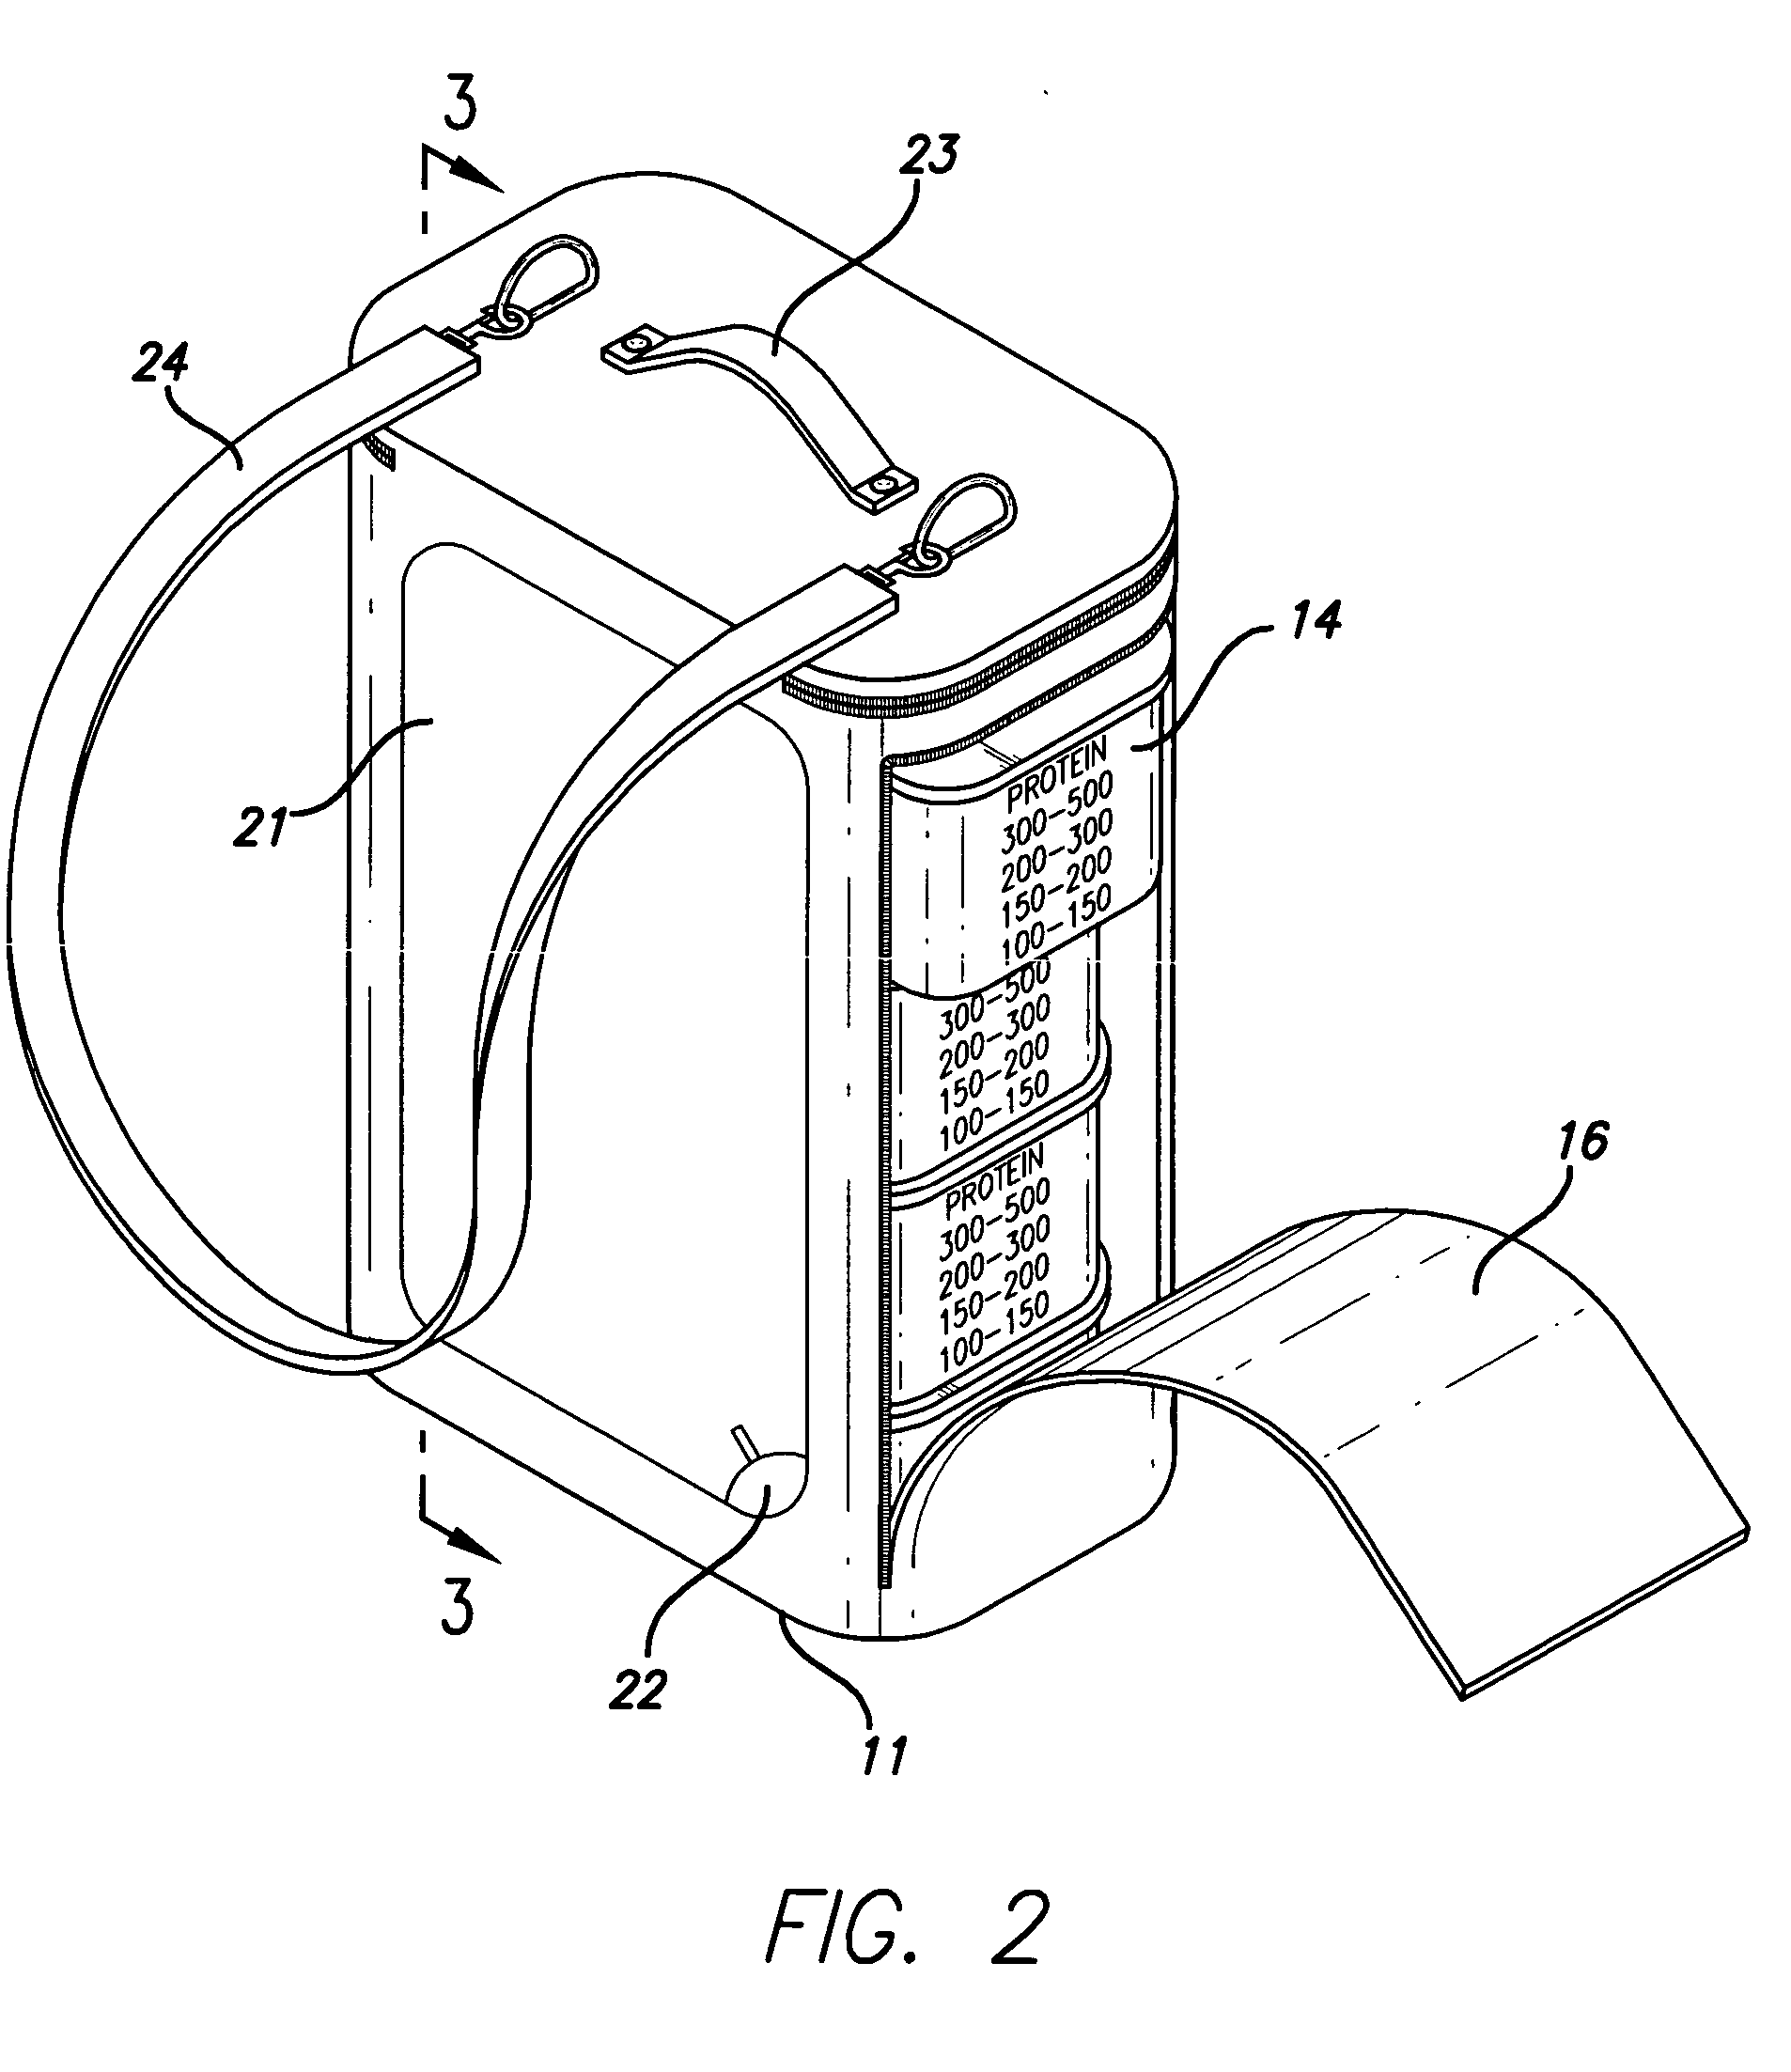 Modular apparatus and method for nutrition system utilizing portions determined by the eater's weight